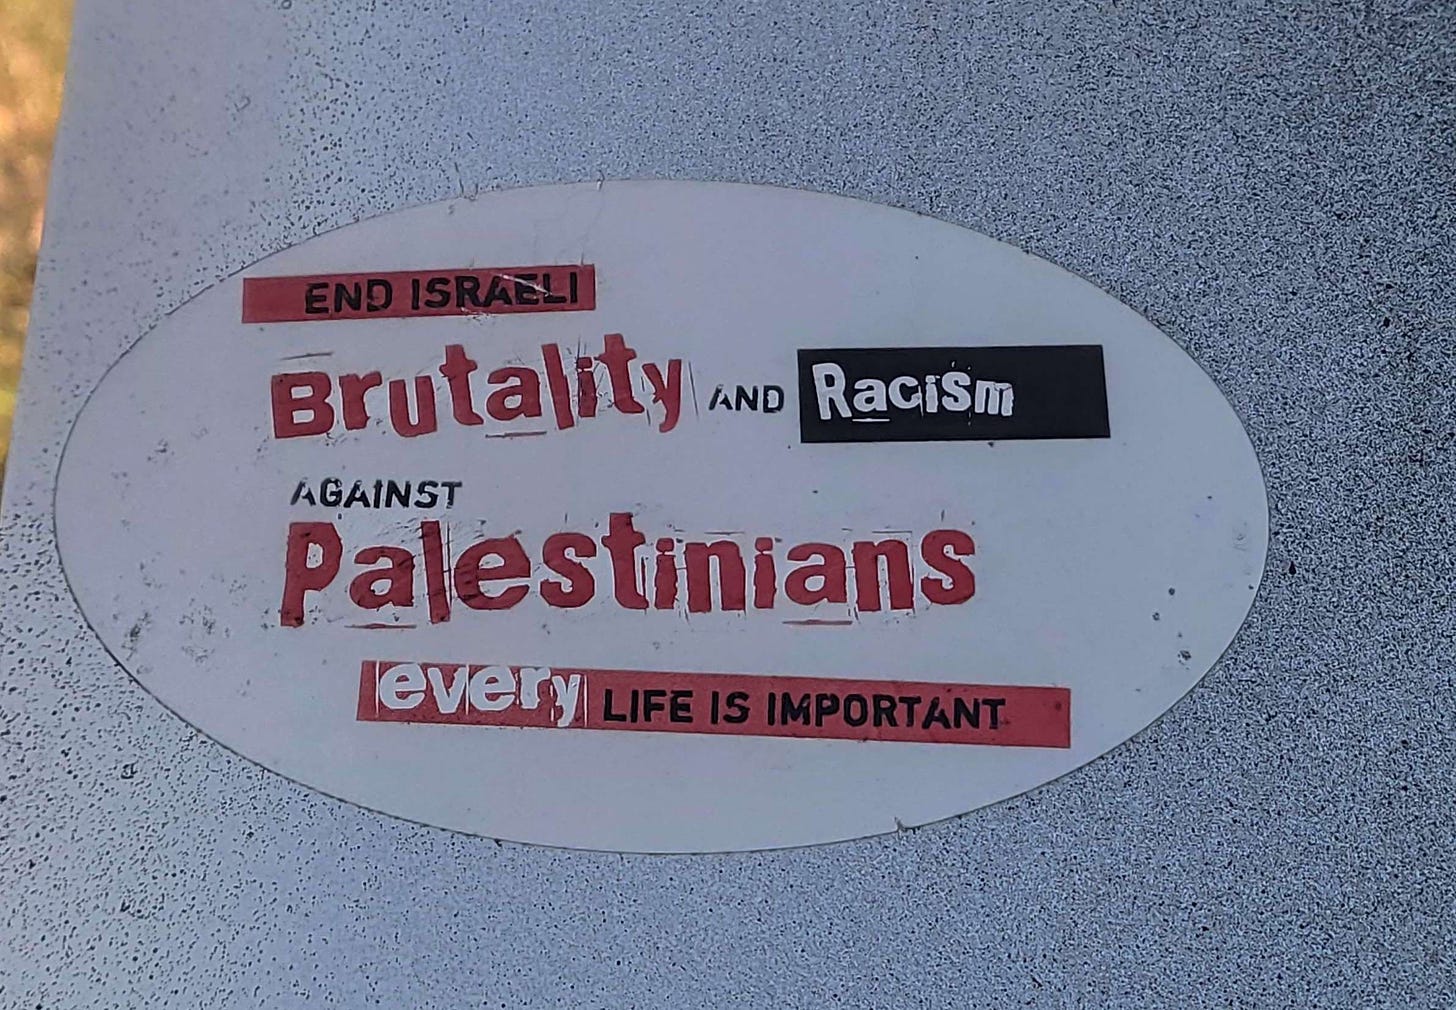 a sticker on the back of a street sign: end israeli brutality against Palestinians every life is important